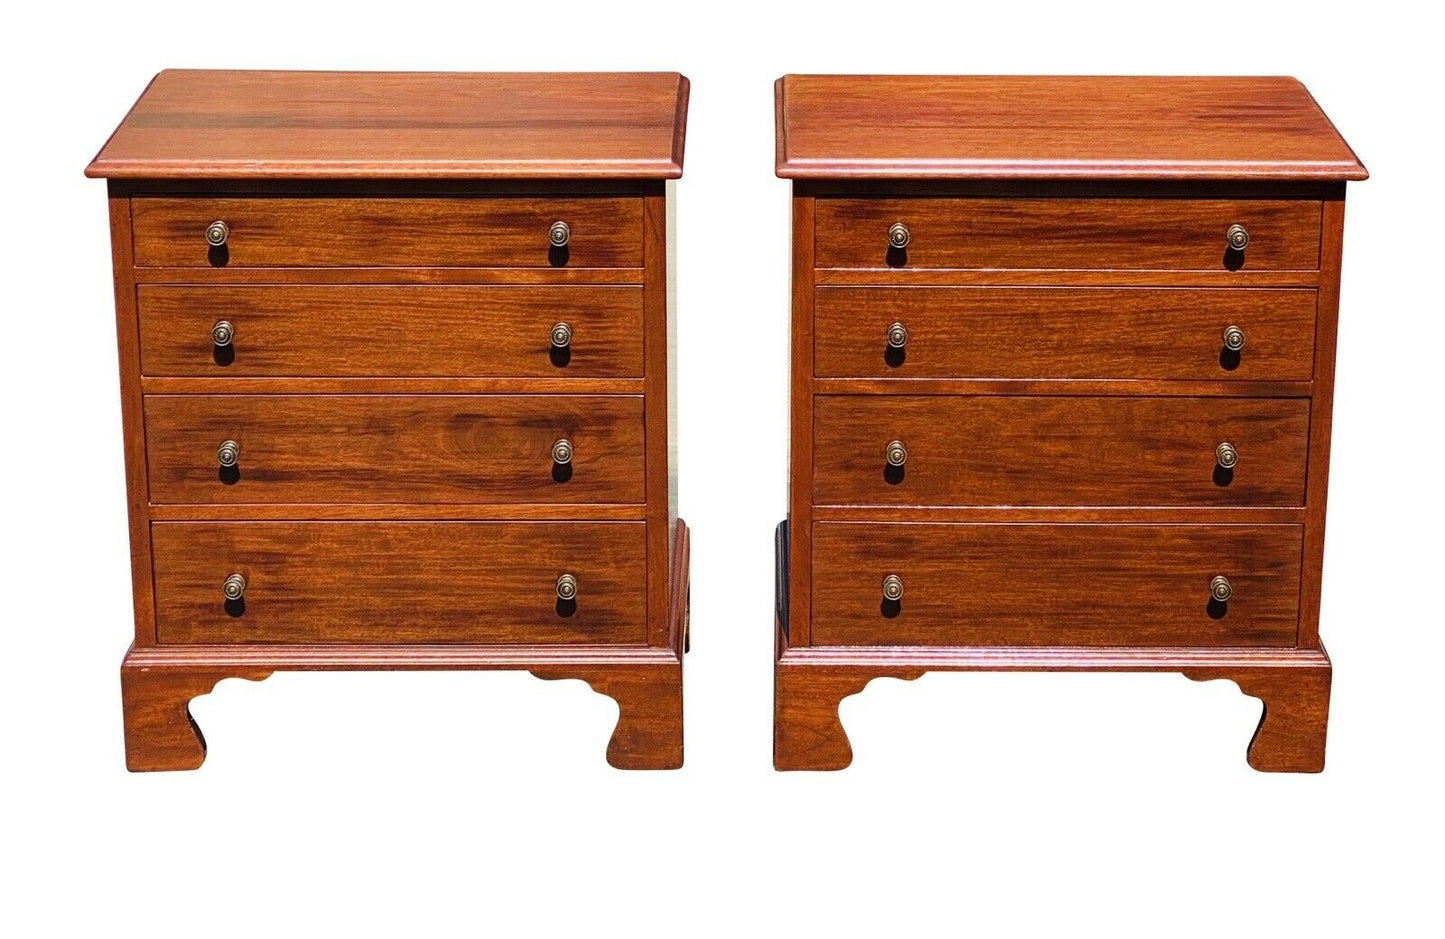 19th Century Antique Pair of Mahogany Bachelors Chests / Nightstands